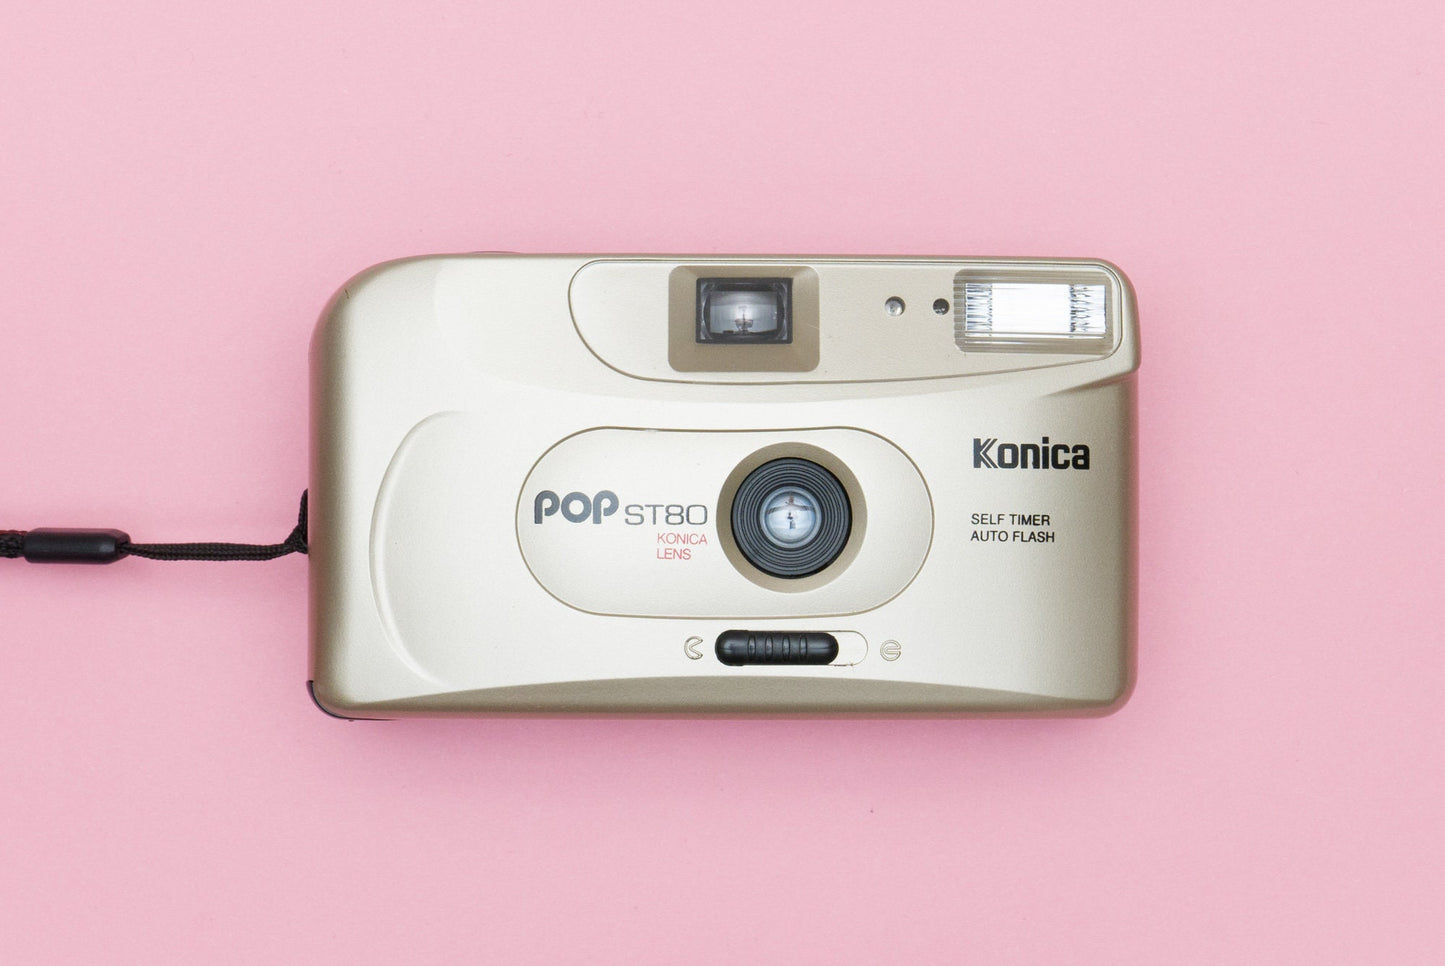 Konica POP ST80 35mm Compact Point and Shoot Film Camera